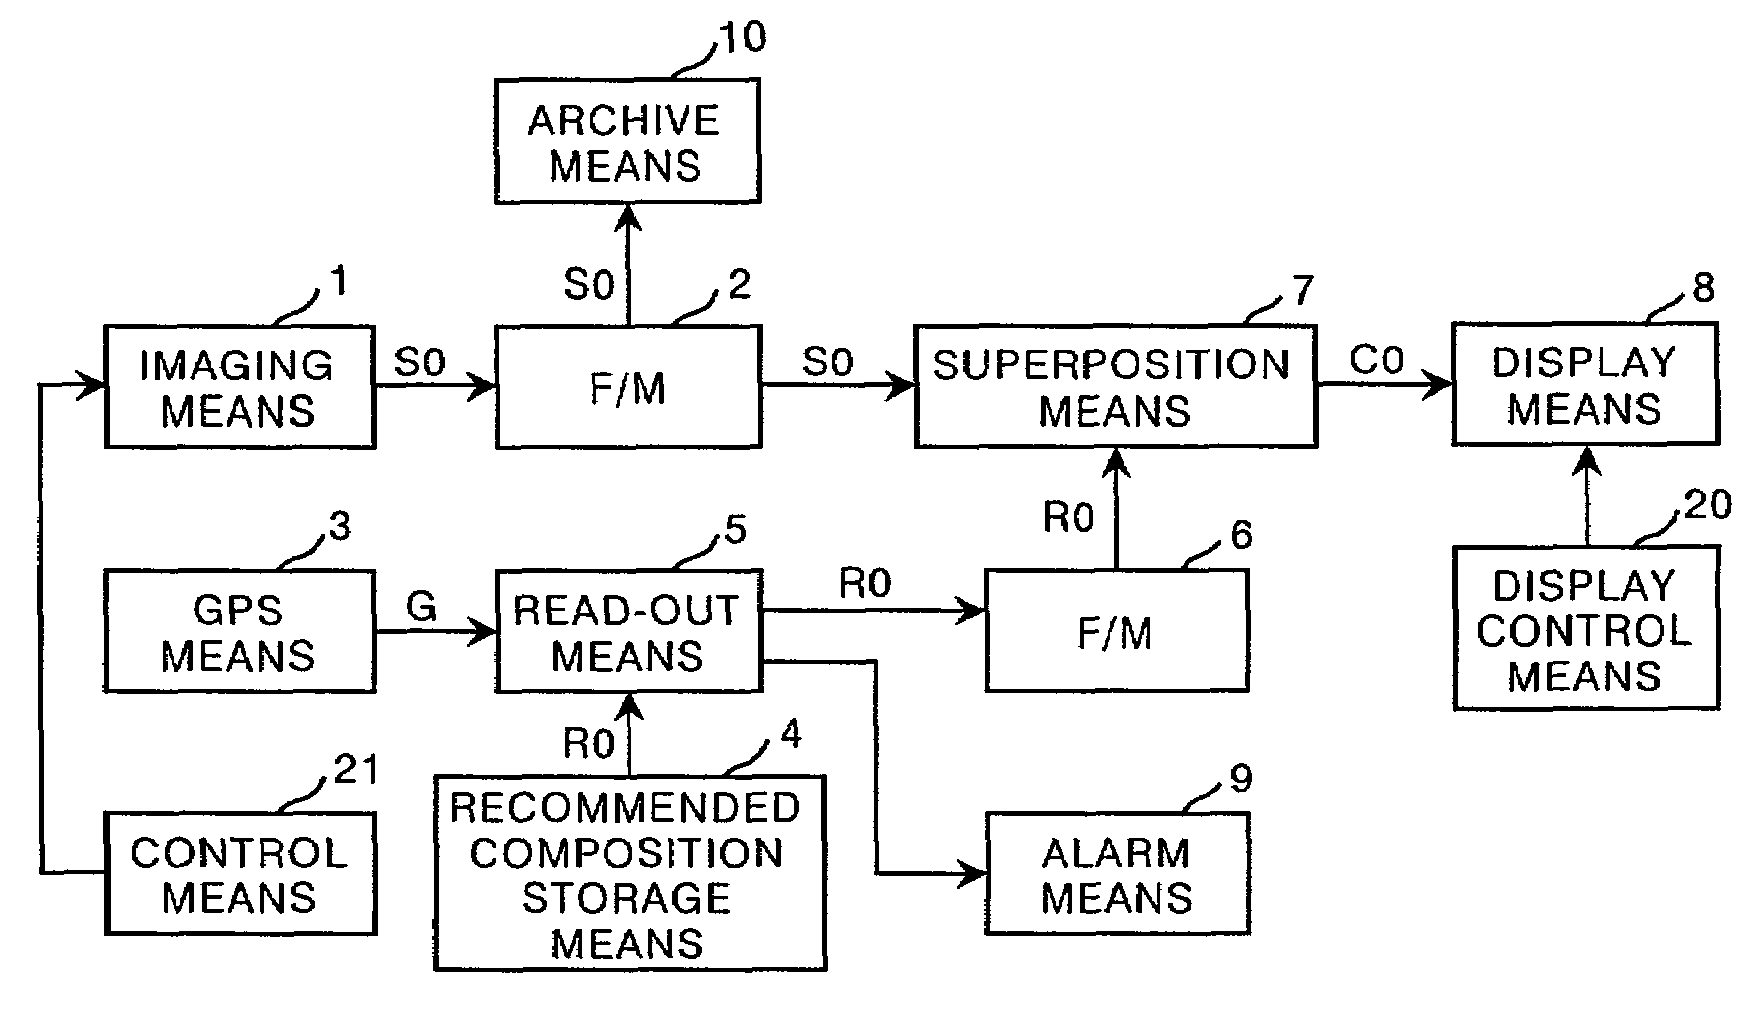 Imaging device for imaging based upon a reference composition for a subject